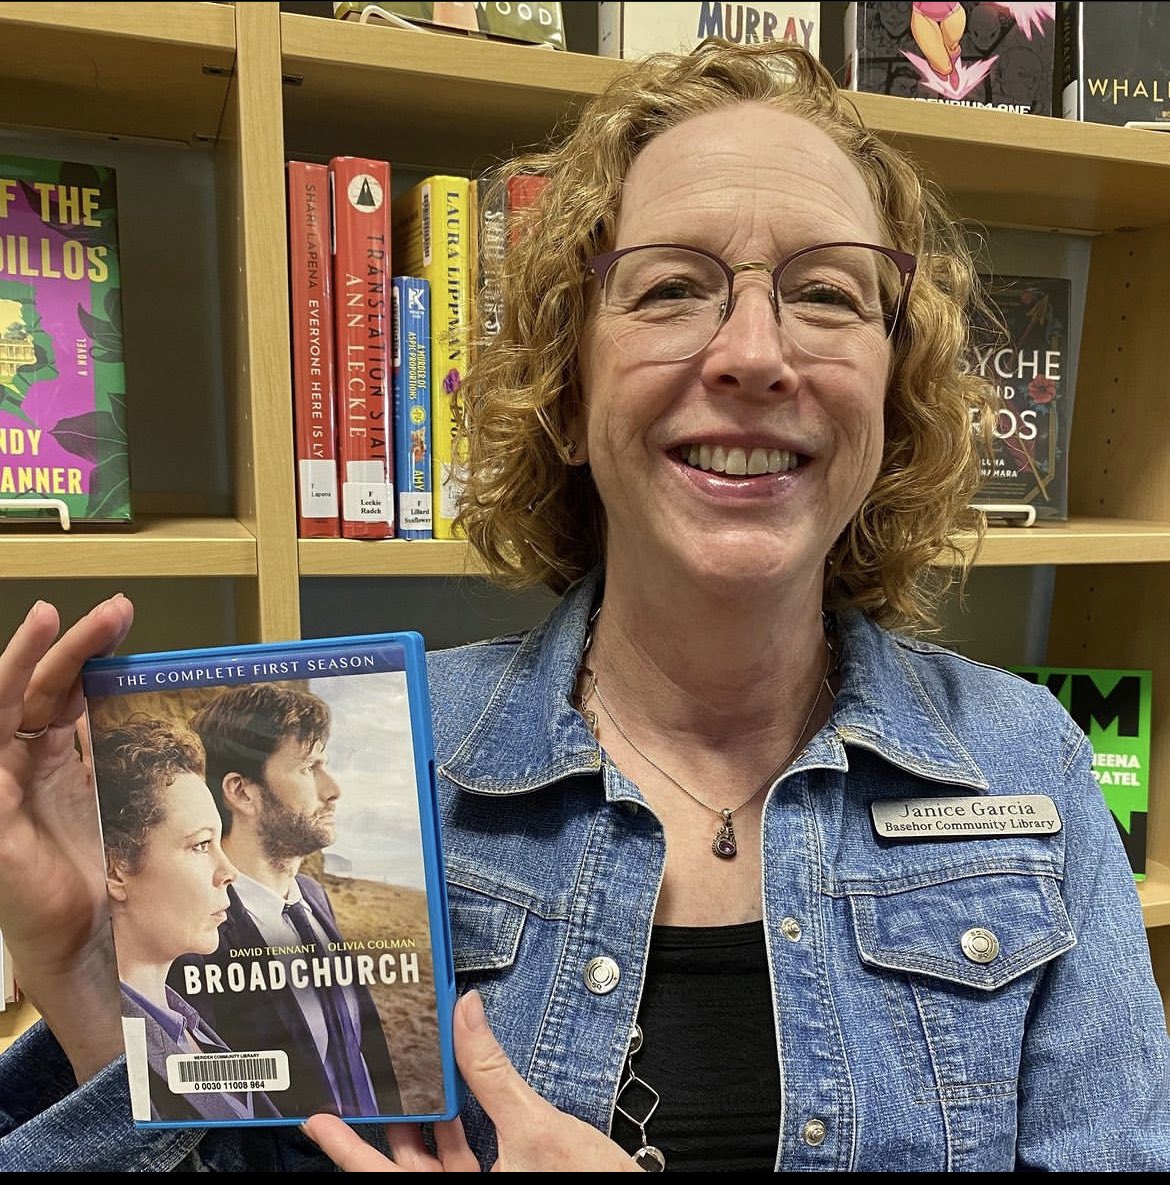 It's time for another Staff Pick! Janice's pick is the TV series 'Broadchurch' Janice writes, 'Well written and beautifully shot, 'Broadchurch' is a deliberate, slowly unfolding mystery procedural with terrific performances from a fine cast.